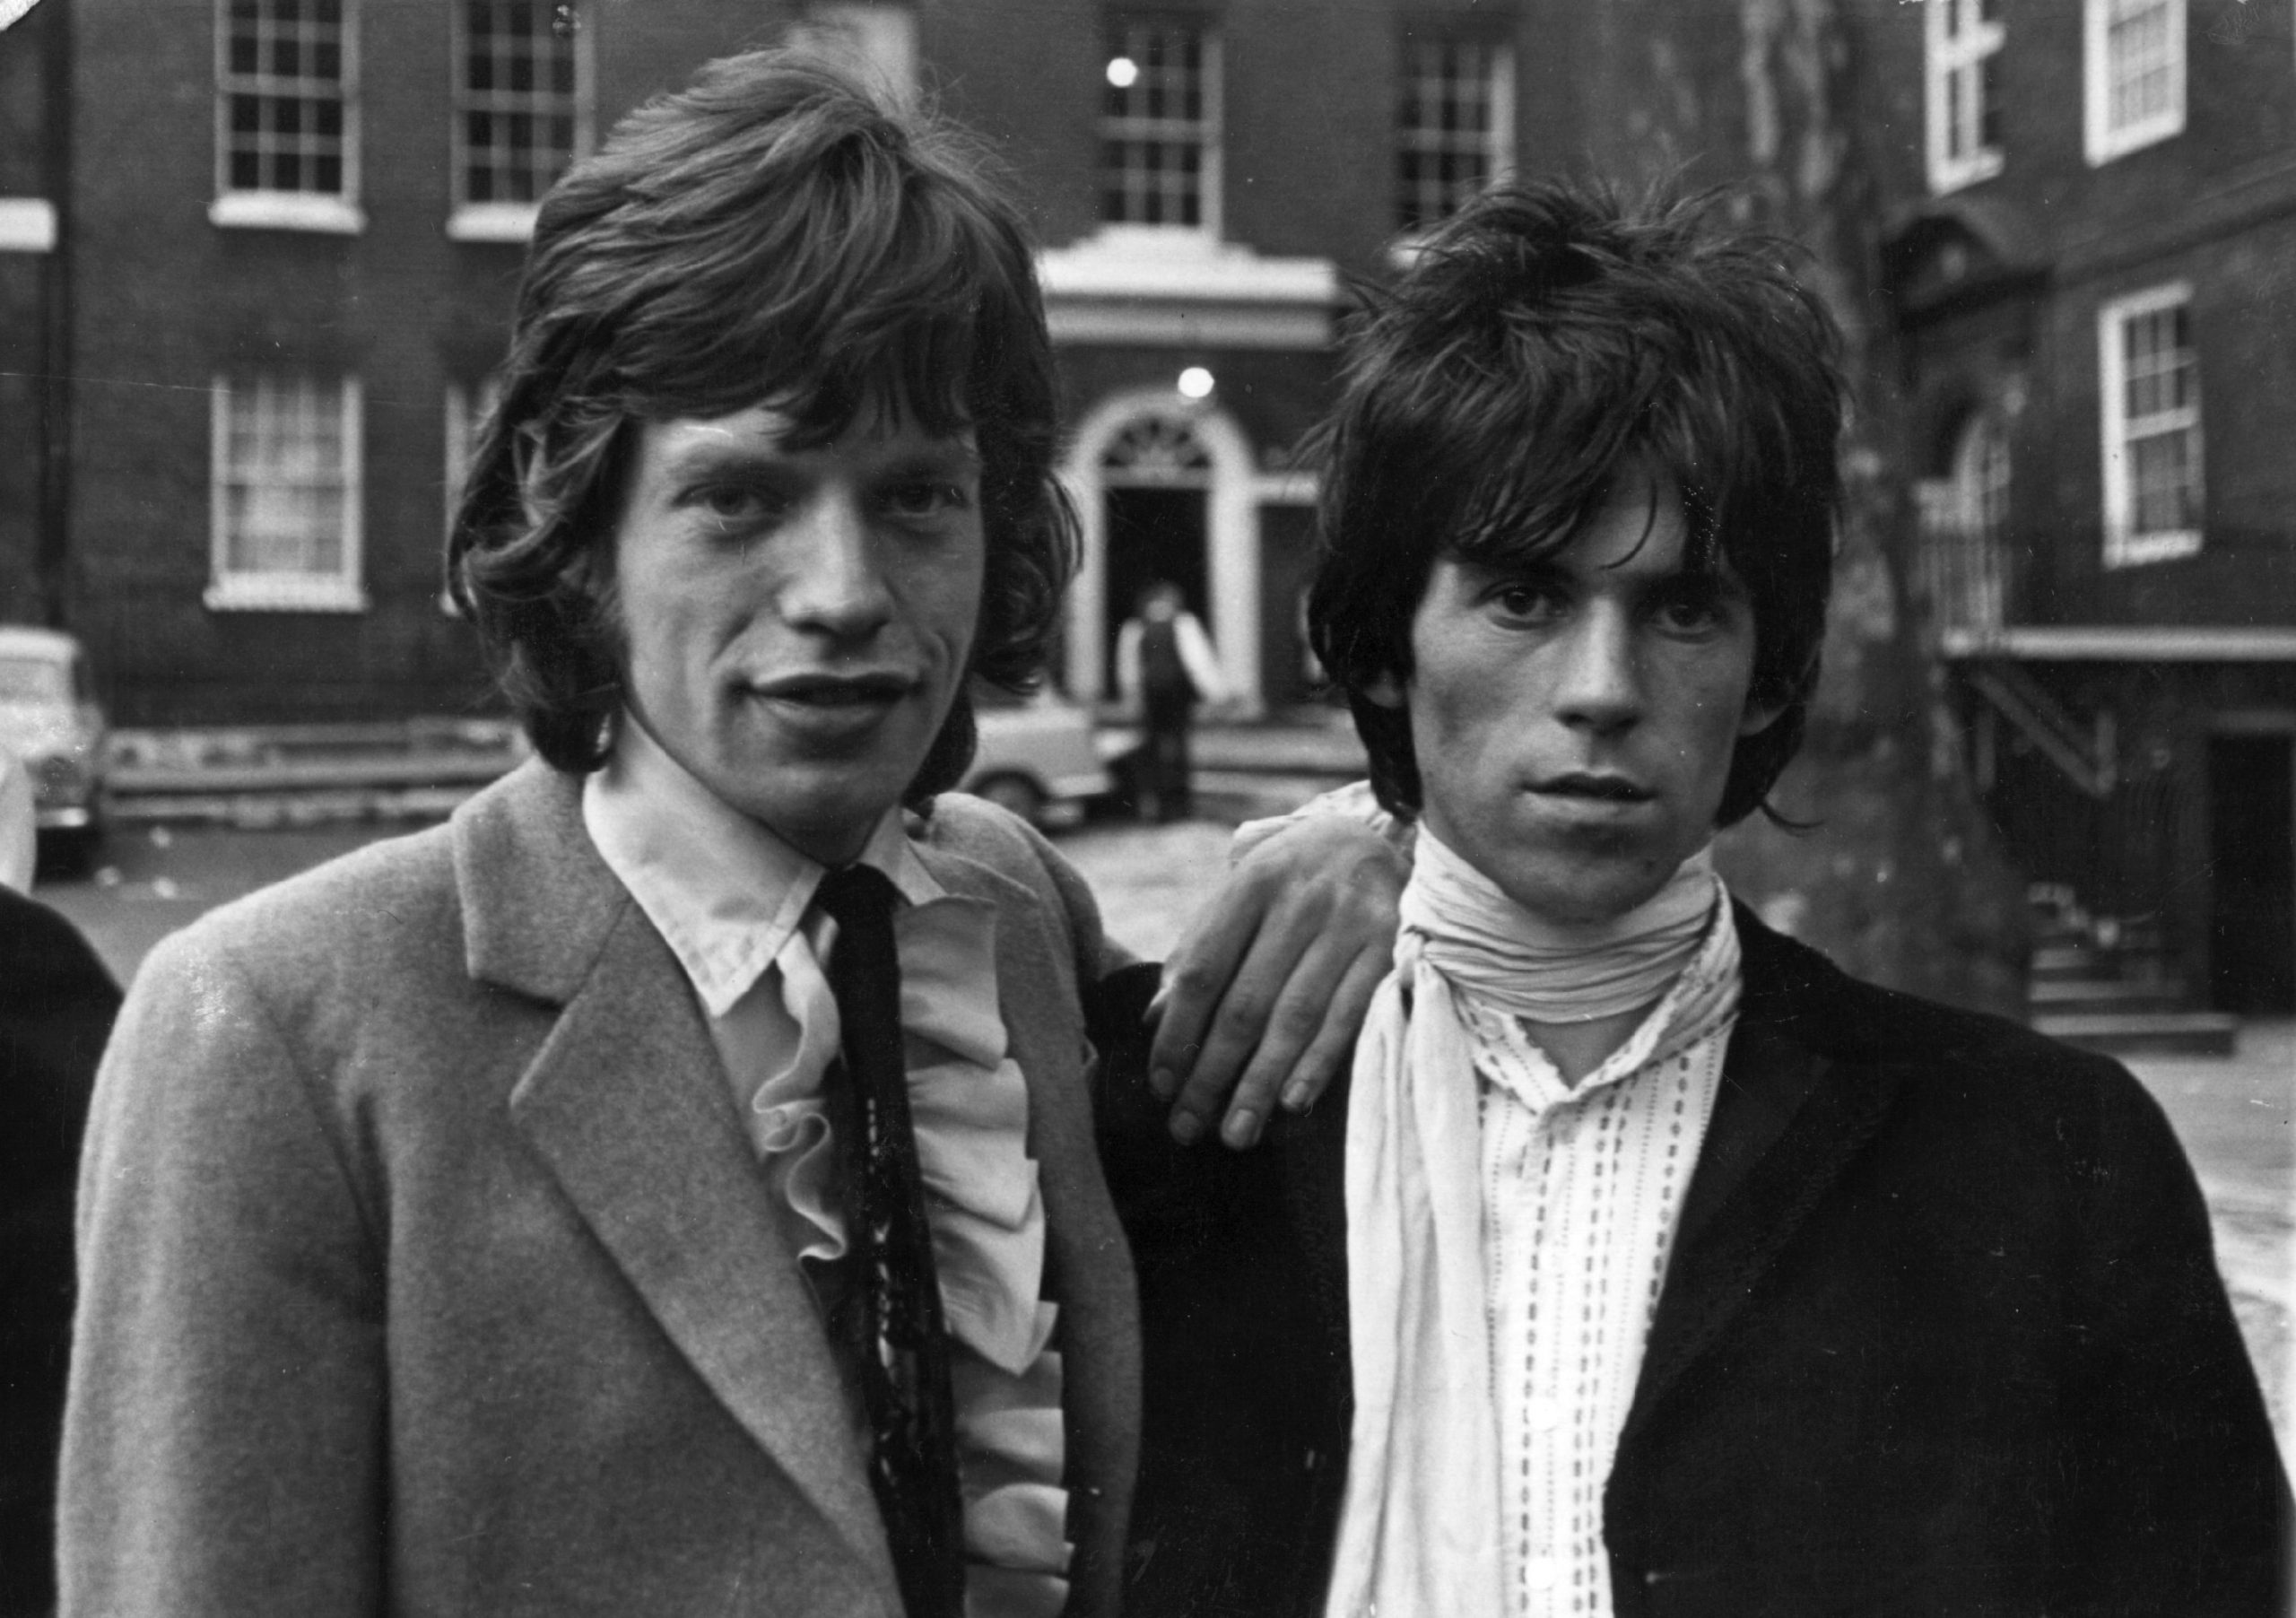 Mick Jagger and Keith Richards in front of a building